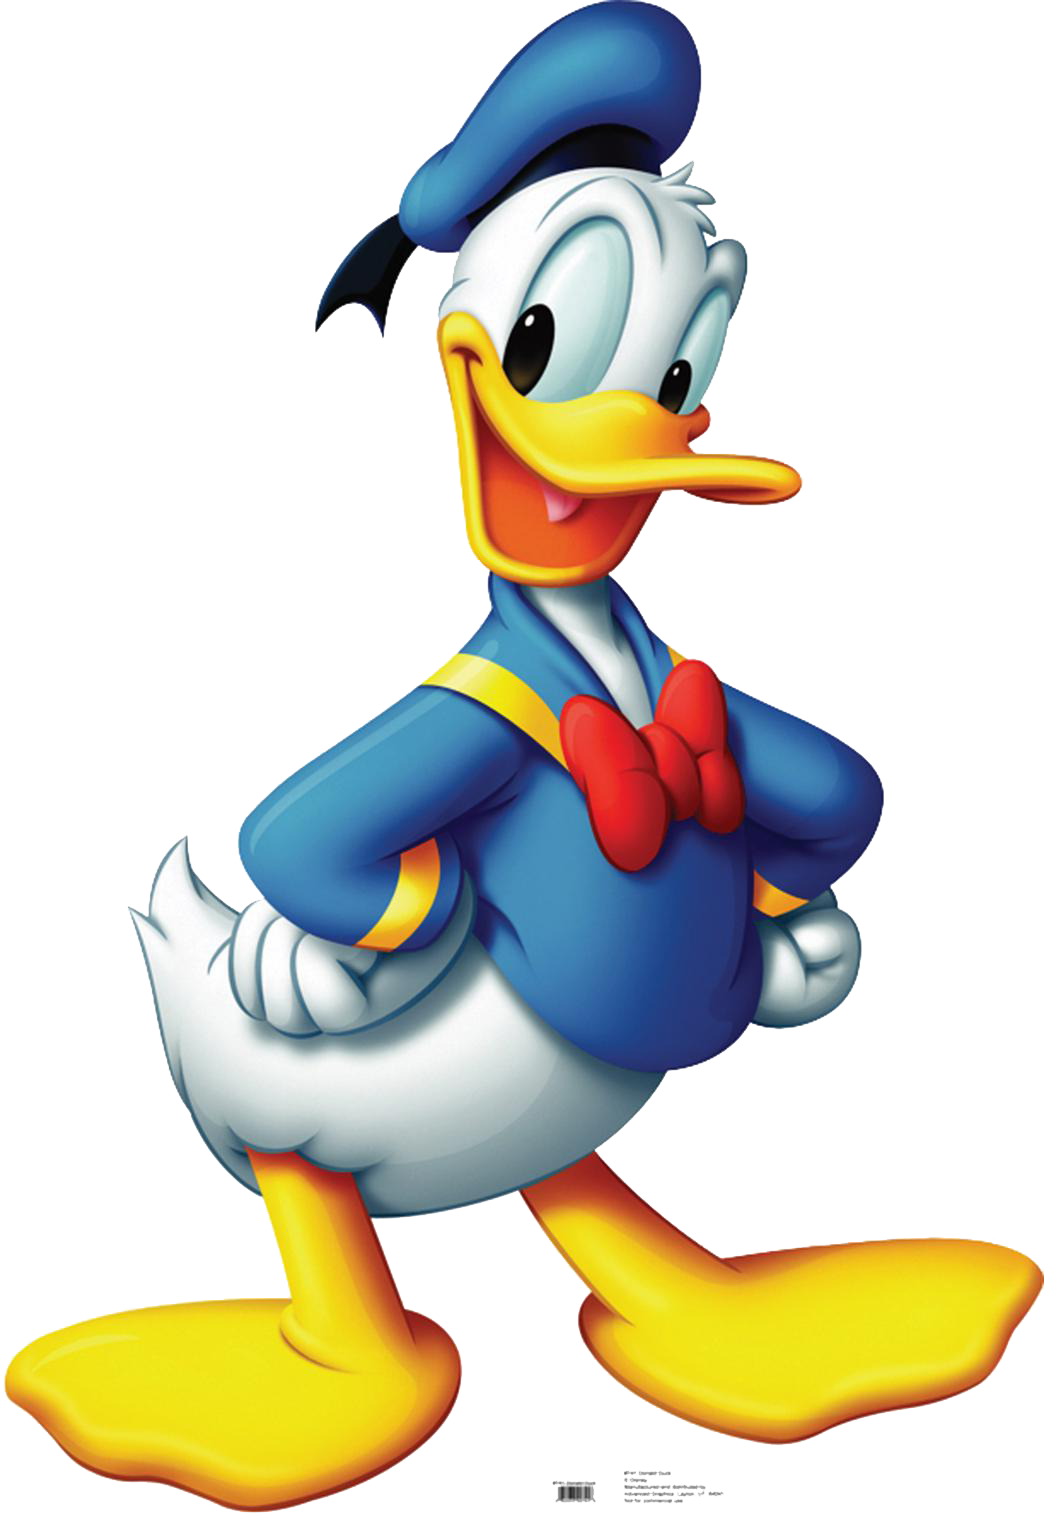 Donald Duck Image PNG Image